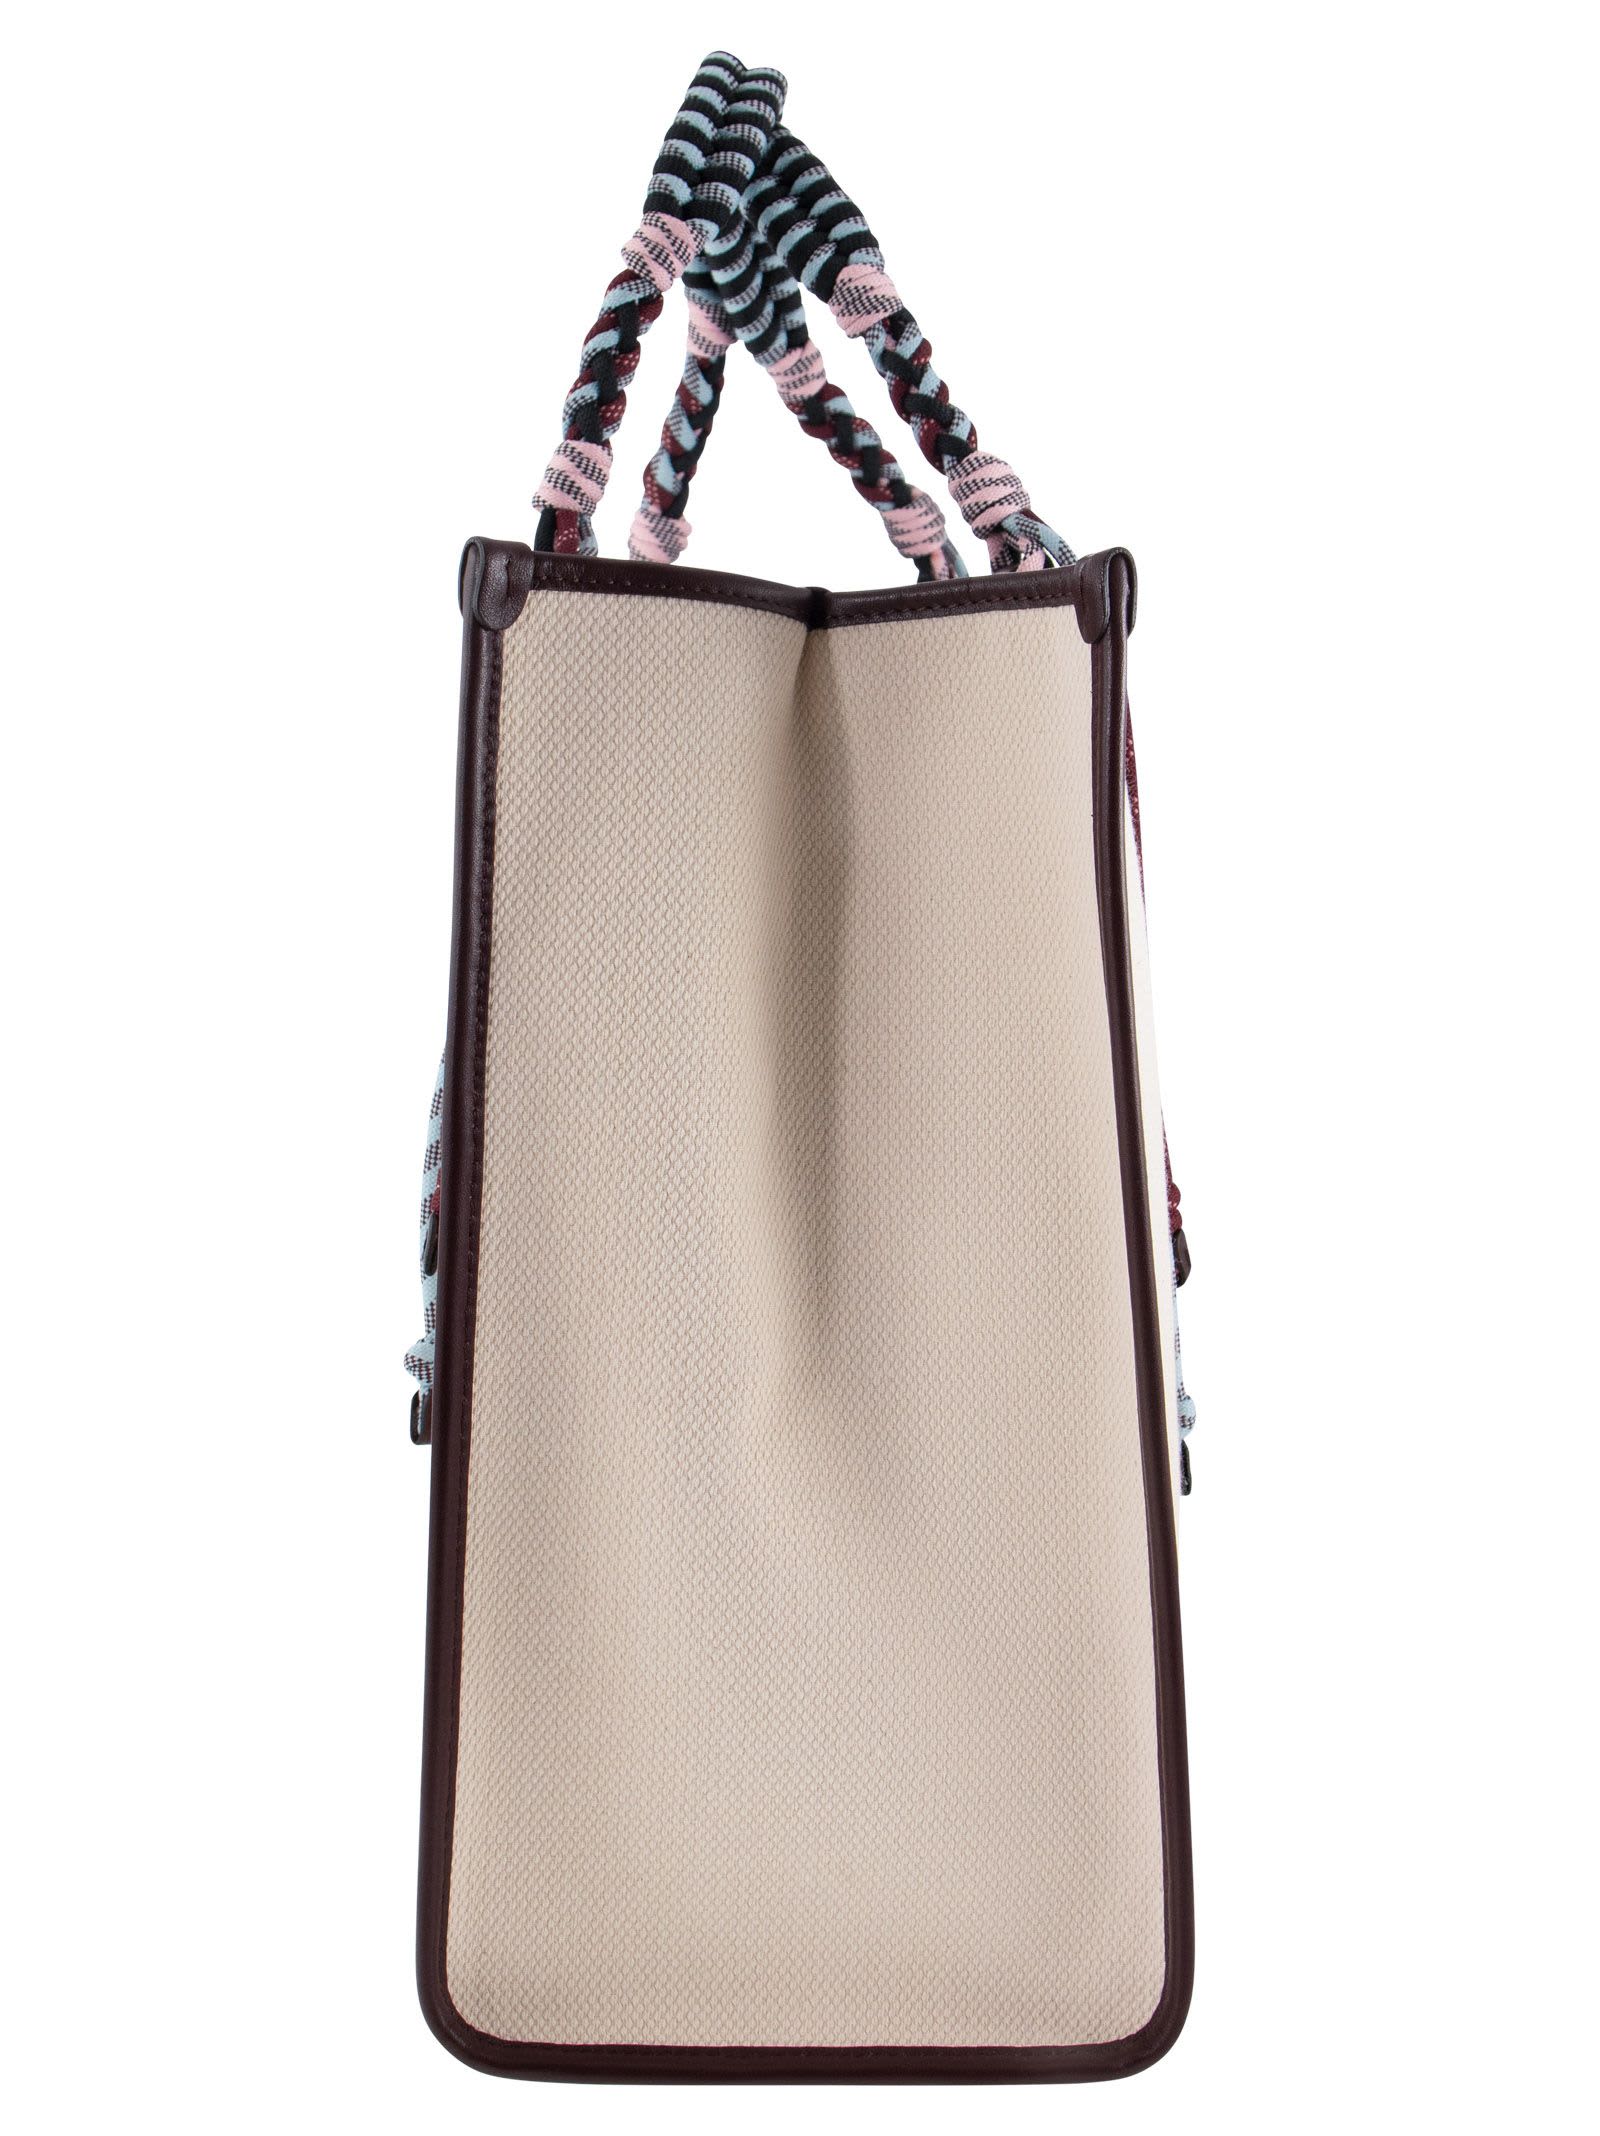 Etro Tote Bag With Braided Handles